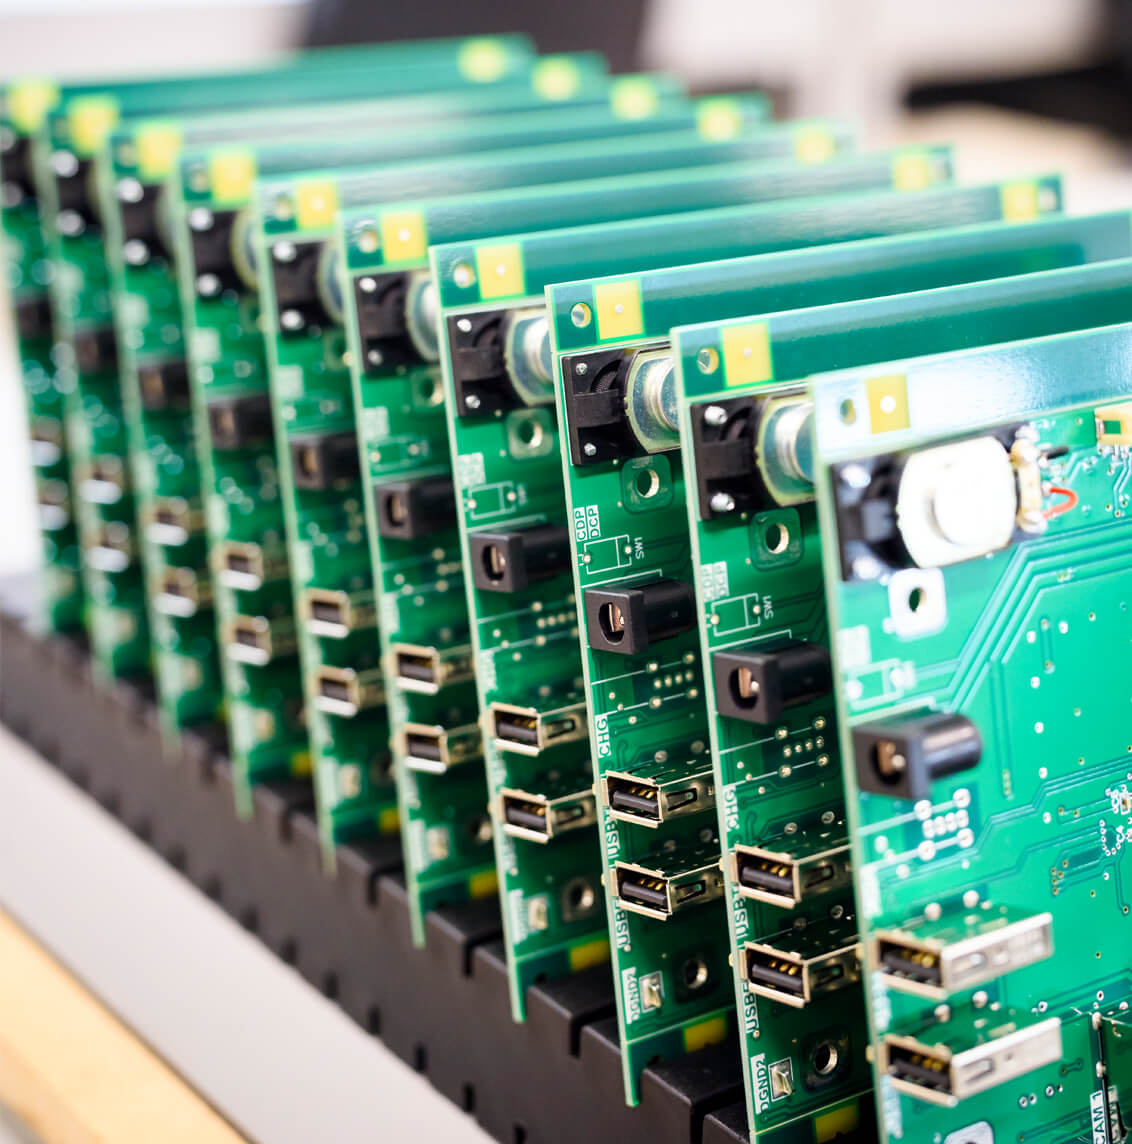 Rapier Electronics Adelaide - printed circuit board manufacturing pic of circuit boards stacked vertically on a rack